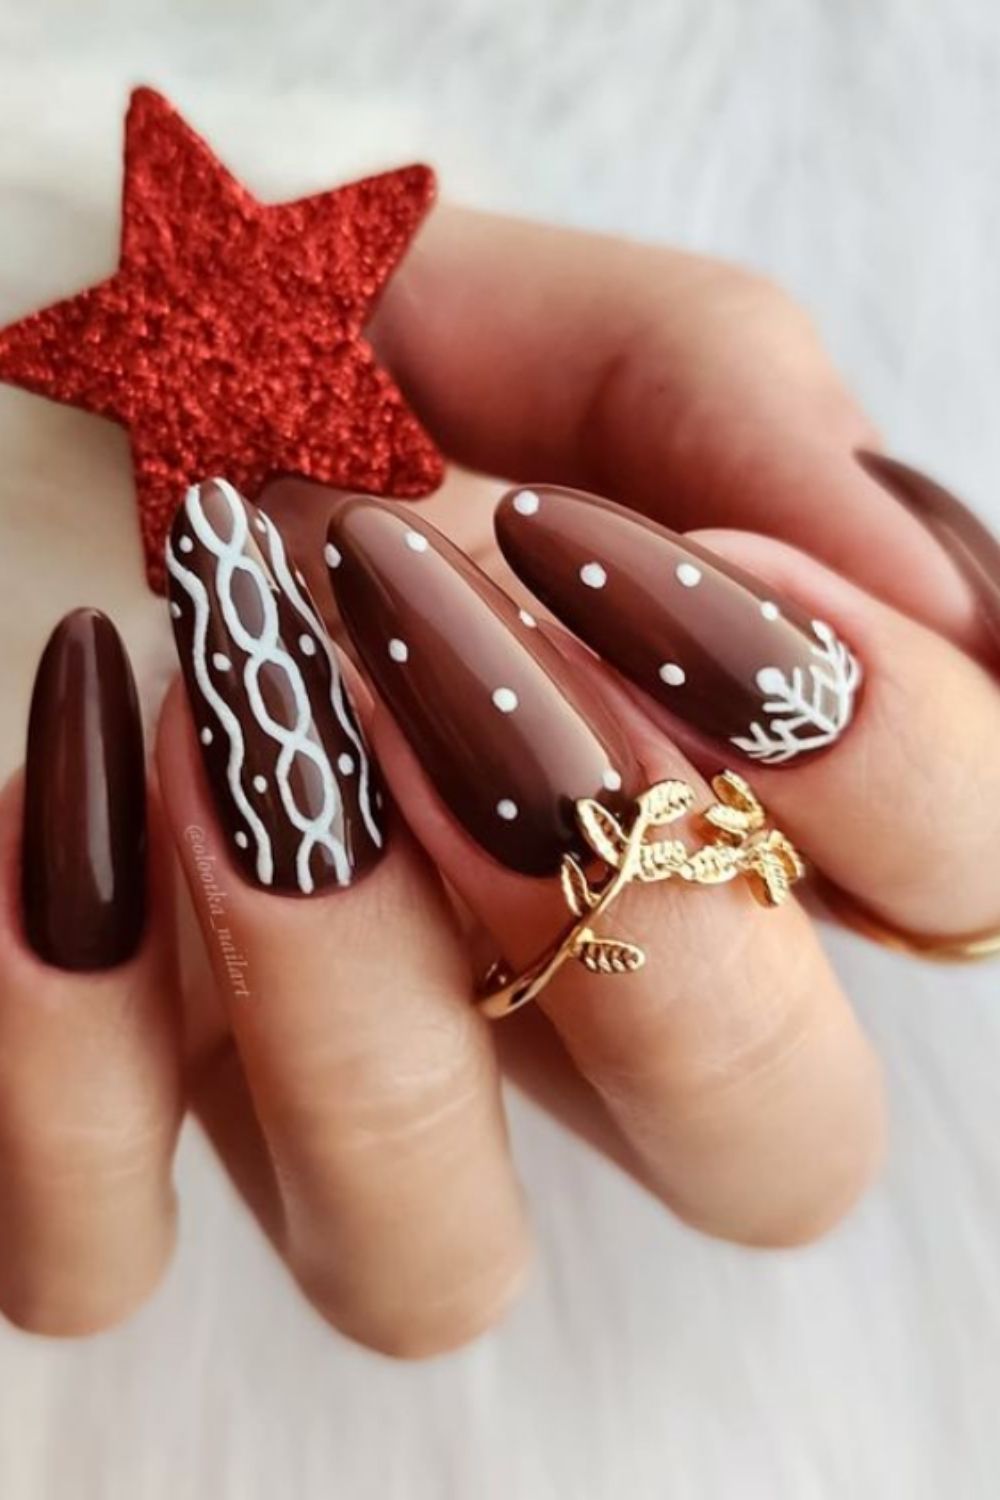 Brown and white almond nails